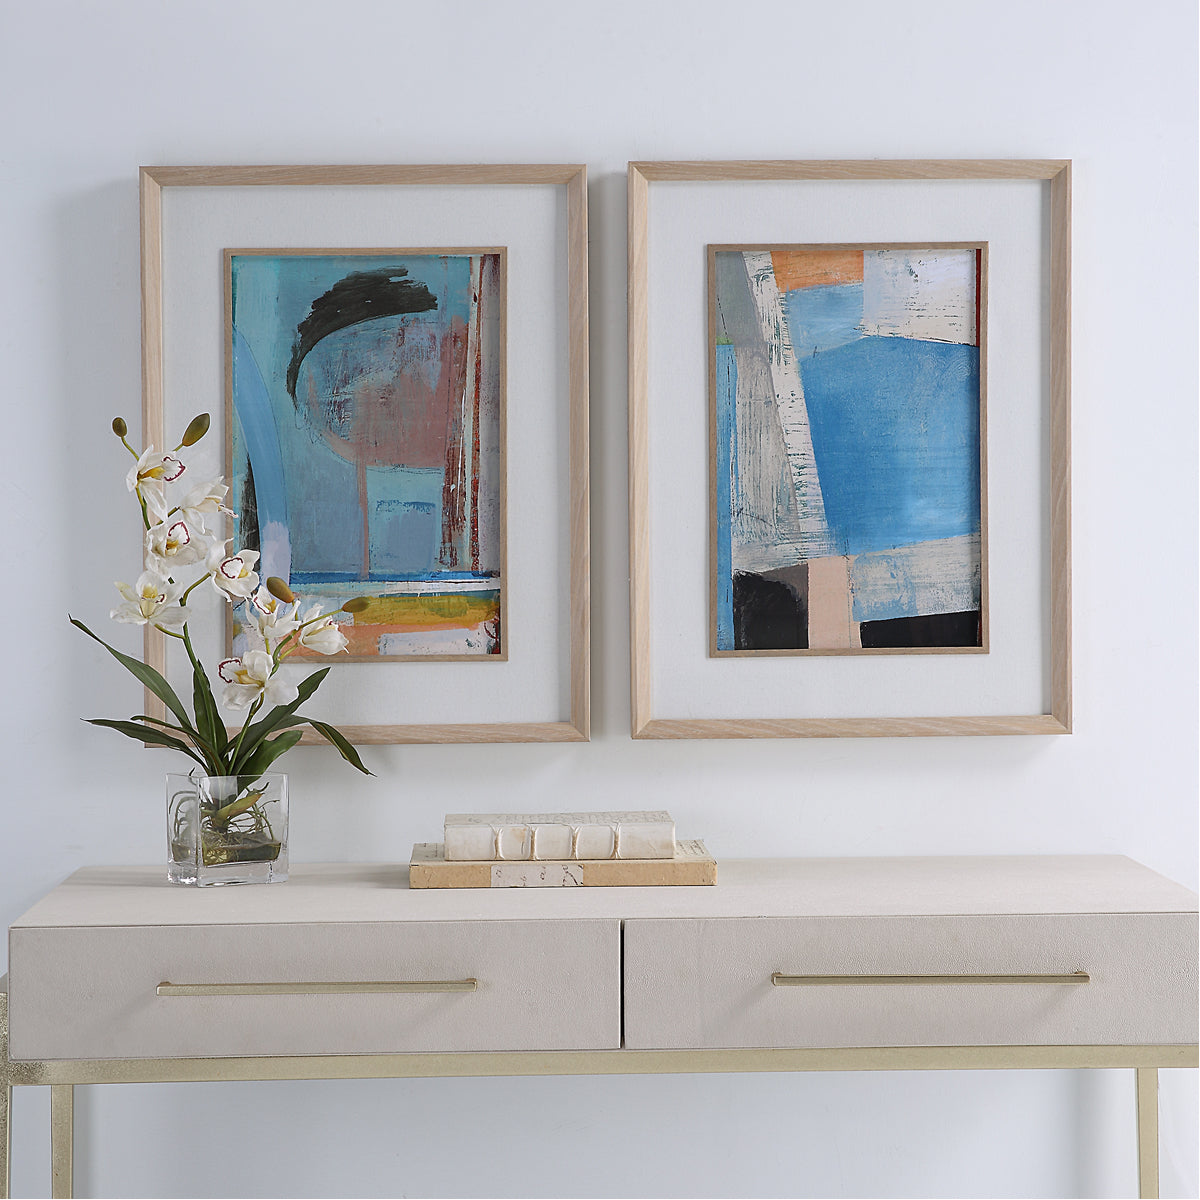 Uttermost Brilliant Clouds Abstract Prints, 2-Piece Set